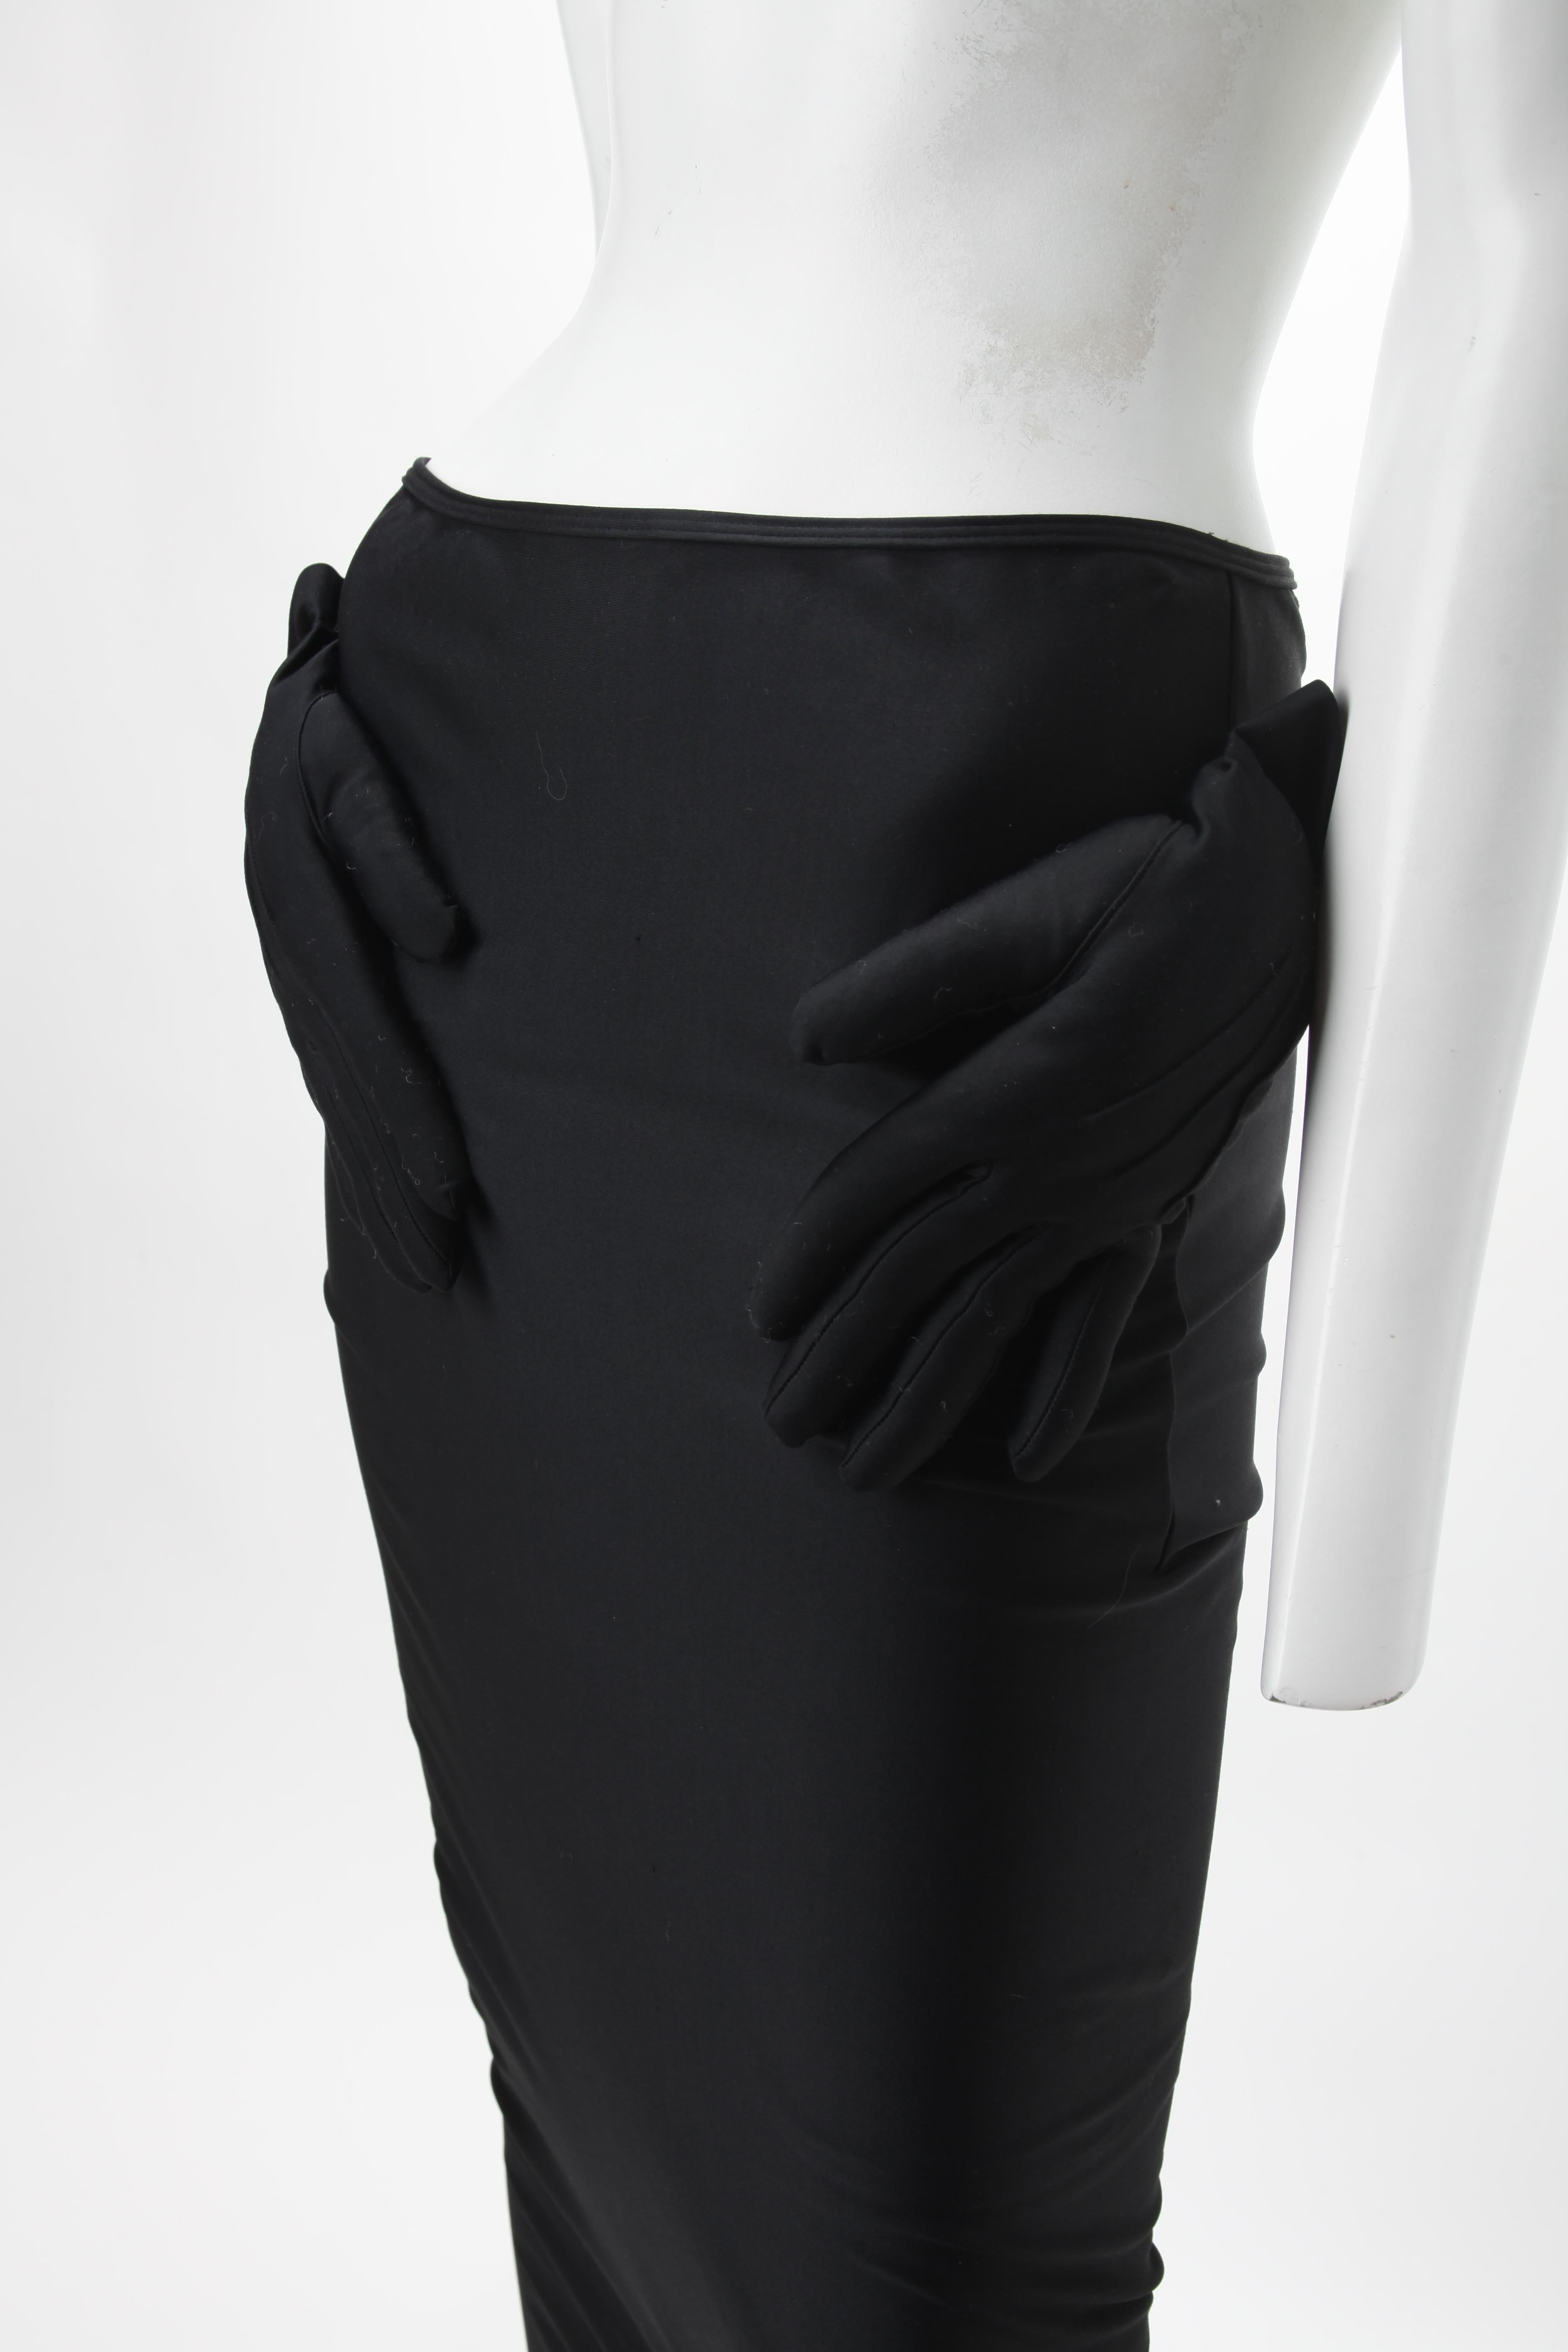 ICONIC Comme des Garcons FW 2007 Black Skirt with 3D Hands Applique  In Good Condition In New York, NY